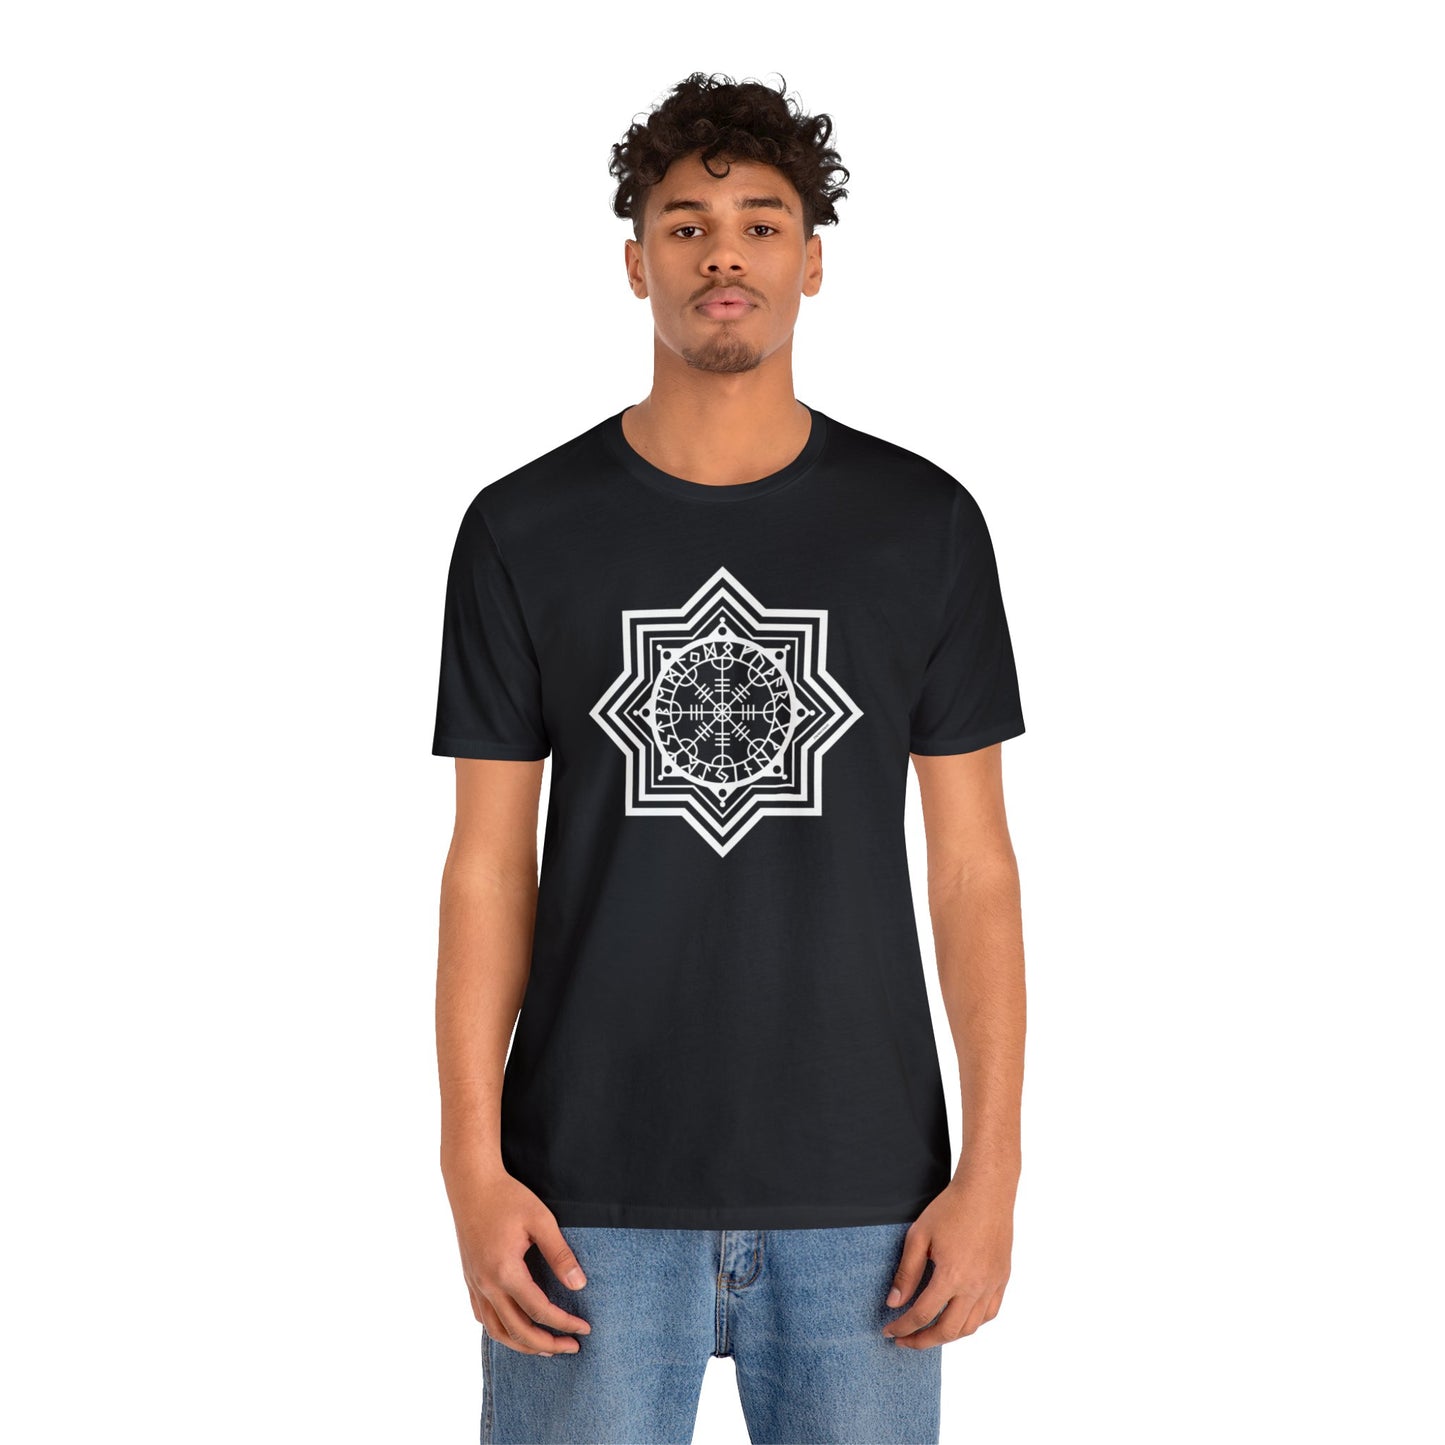 Spellcaster by Patti Negri "Protection" Unisex Tee